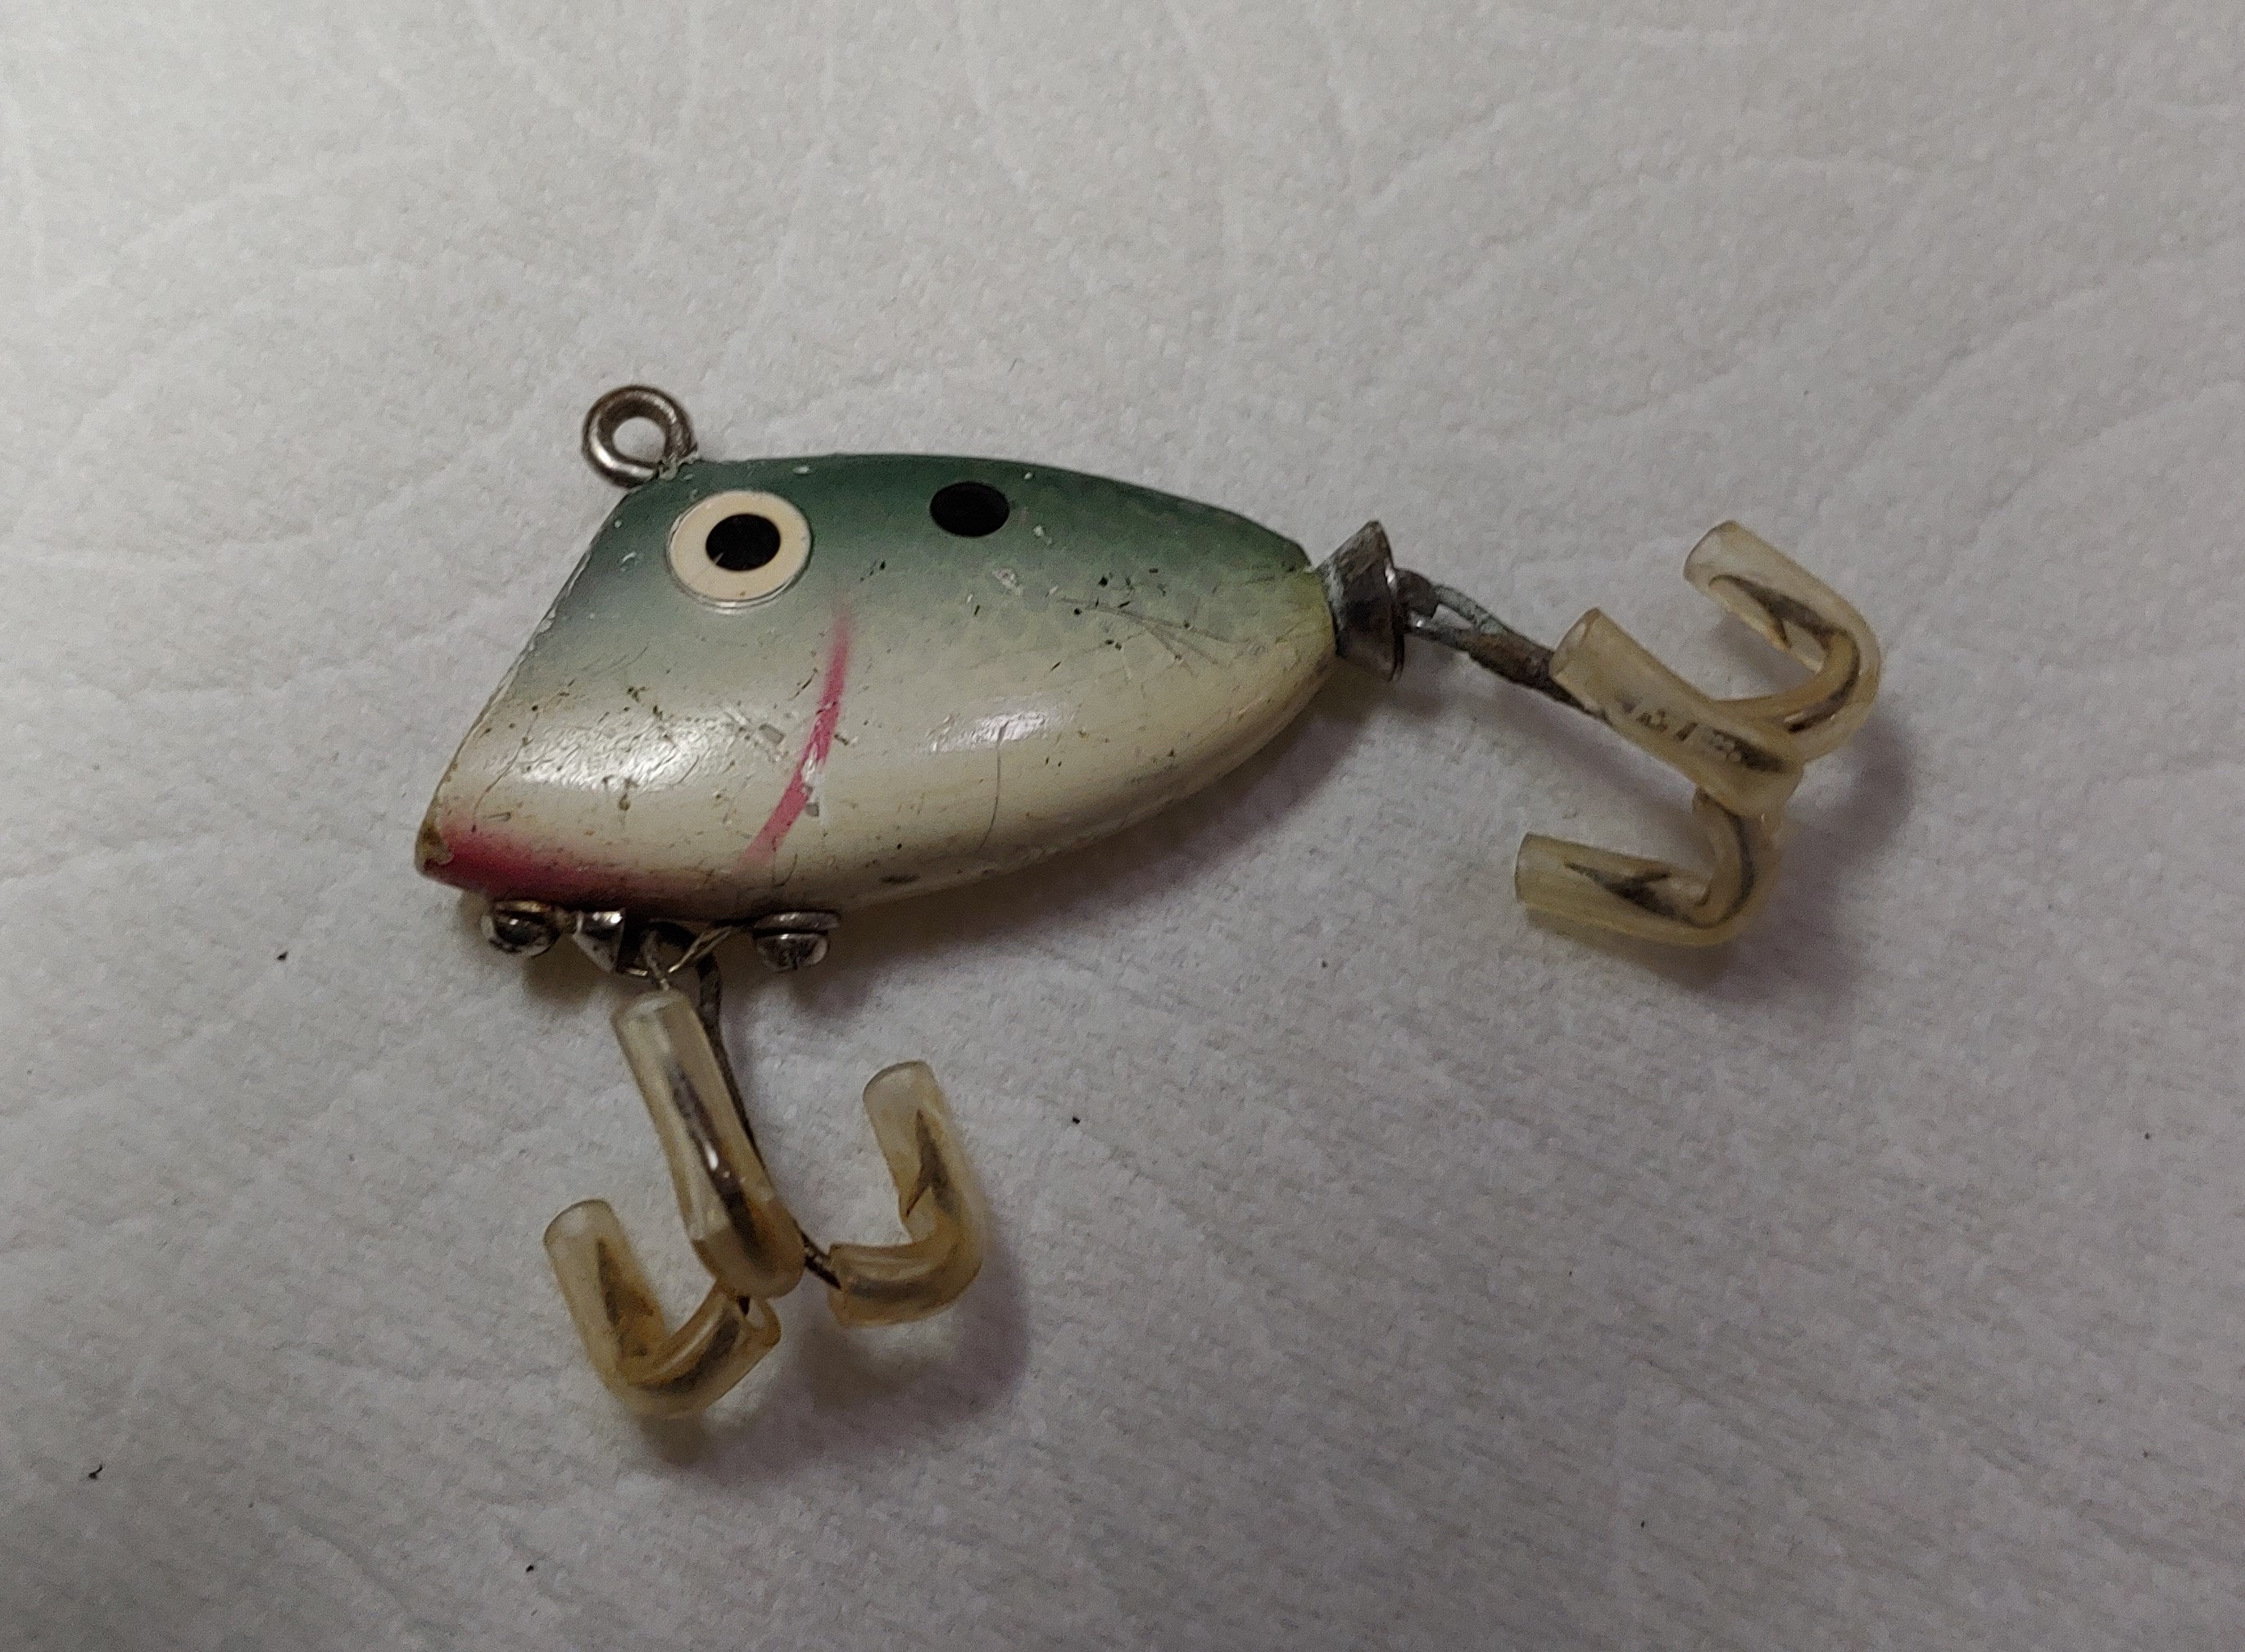 Vintage - Persuader Rubber Frog - Fishing Lure made in Mulberry, Arkansas